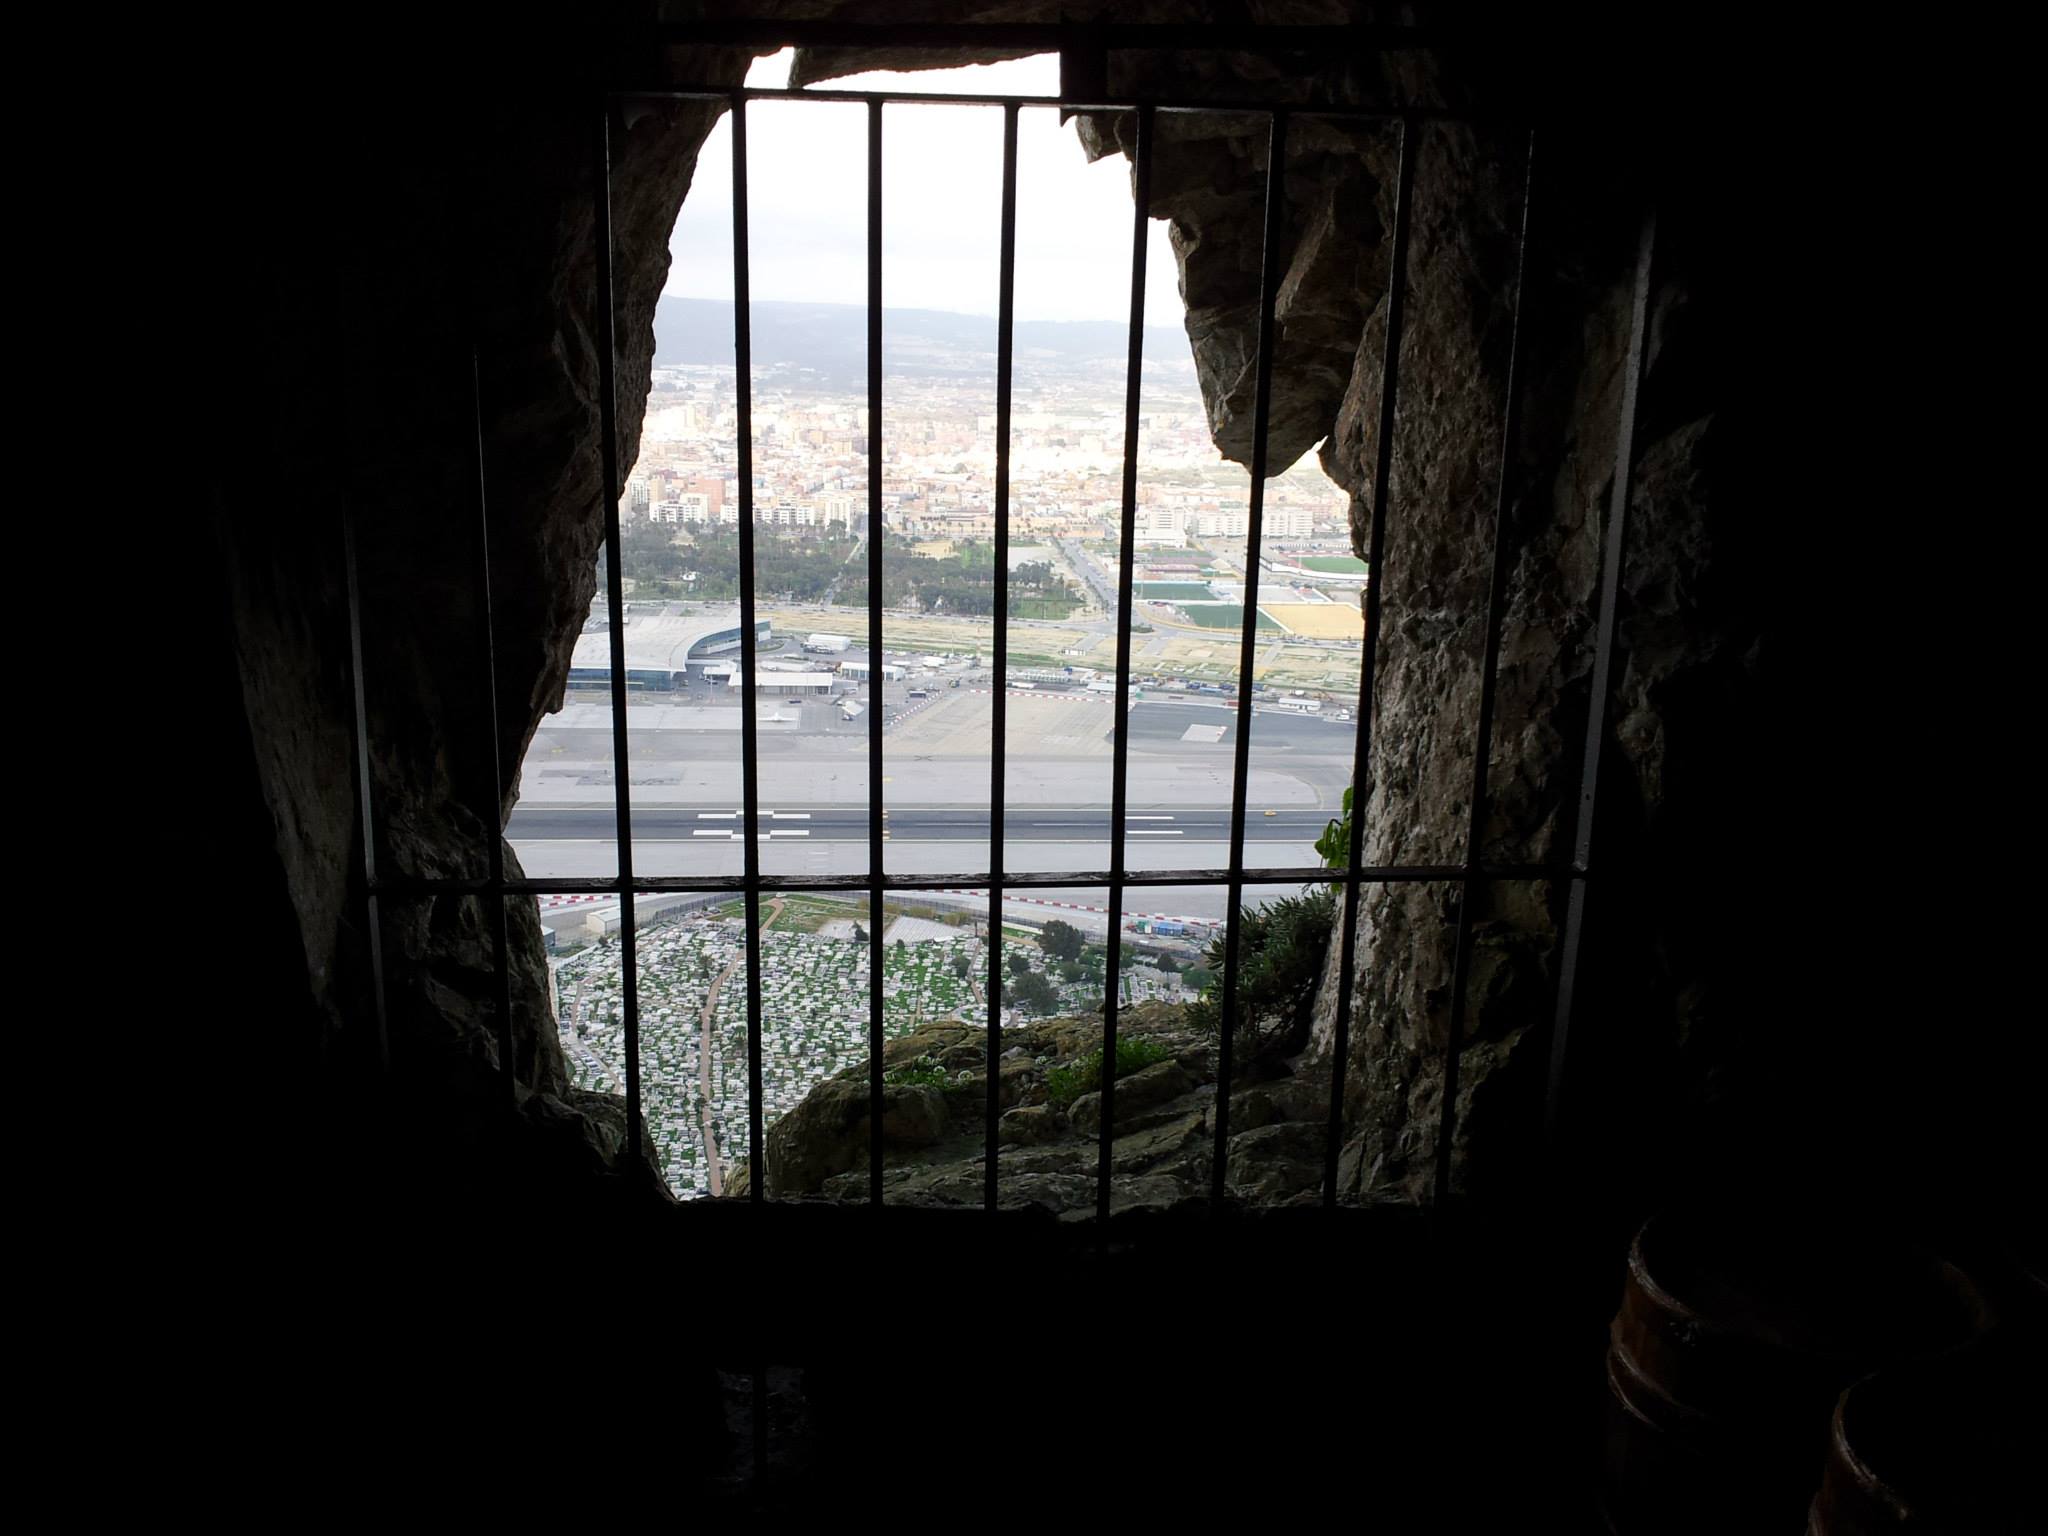 View of Spain from inside the Siege Tunnels